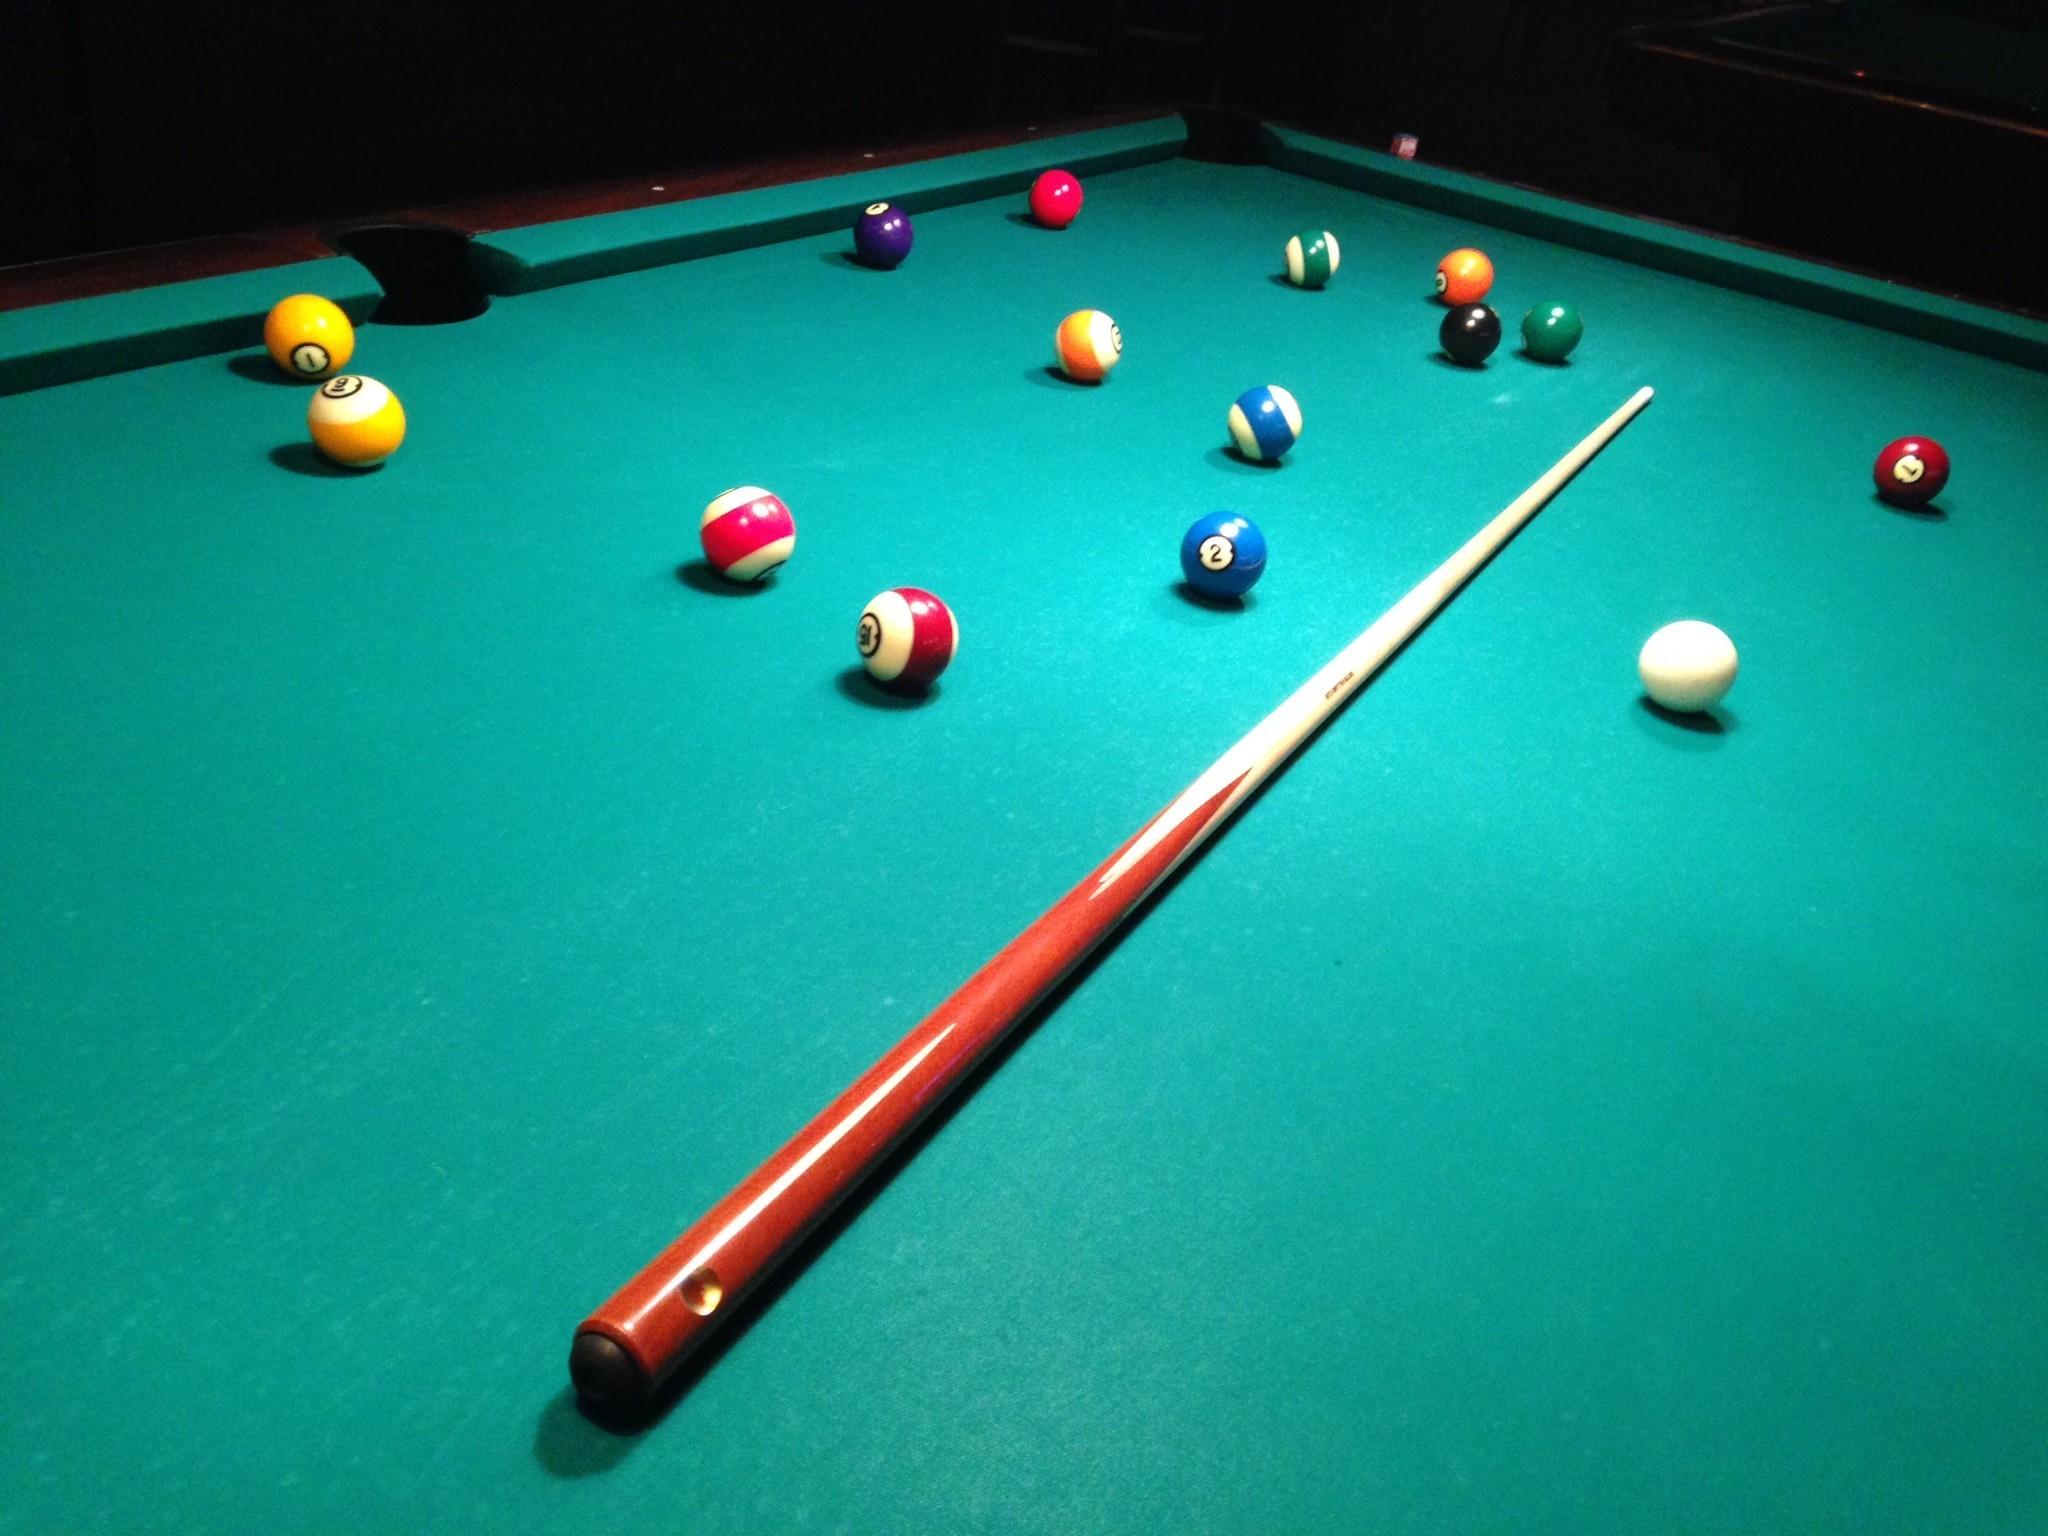 Pool Table Images  Free Photos PNG Stickers Wallpapers  Backgrounds   rawpixel